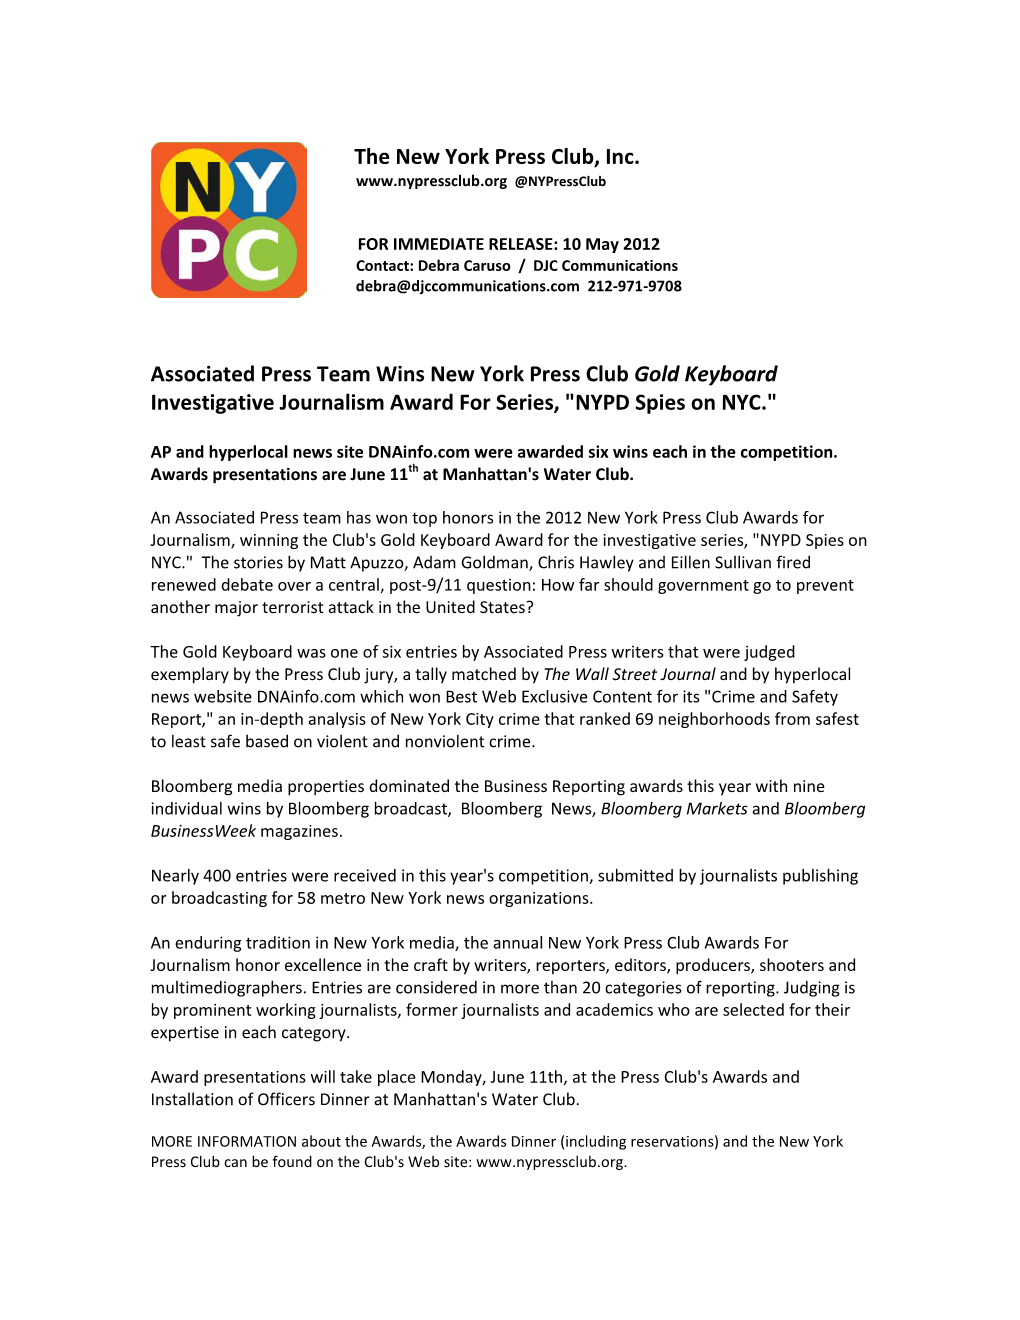 Gold Keyboard Investigative Journalism Award for Series, "NYPD Spies on NYC."